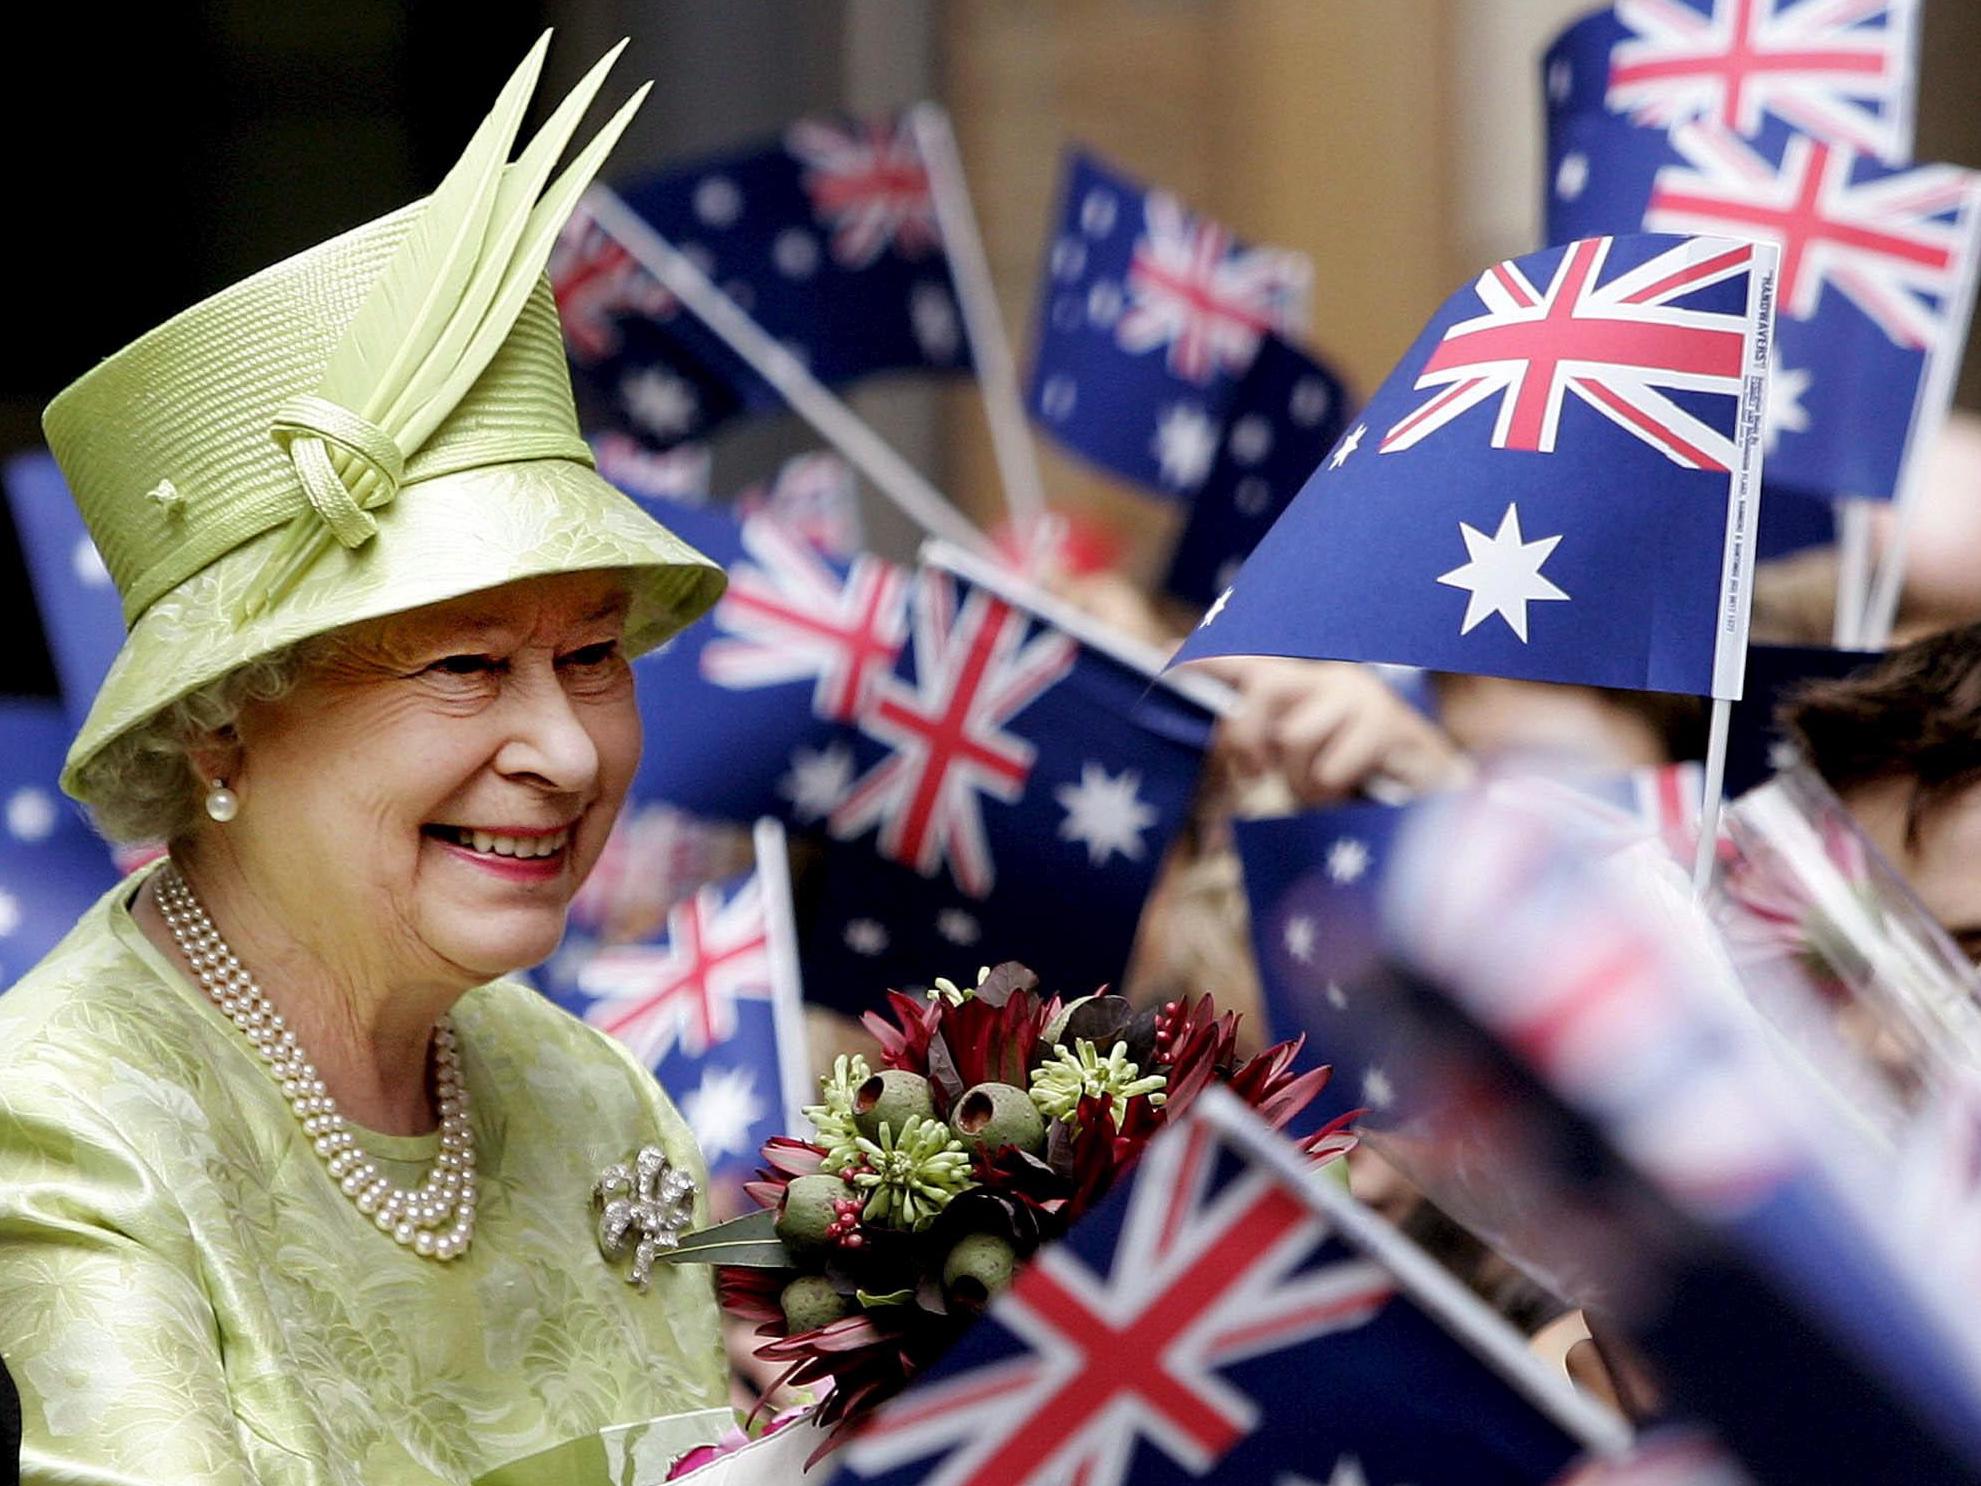 The Queen receives flowers from schoolchildren waving Australian flags after the Commonwealth Day service in Sydney, 2006